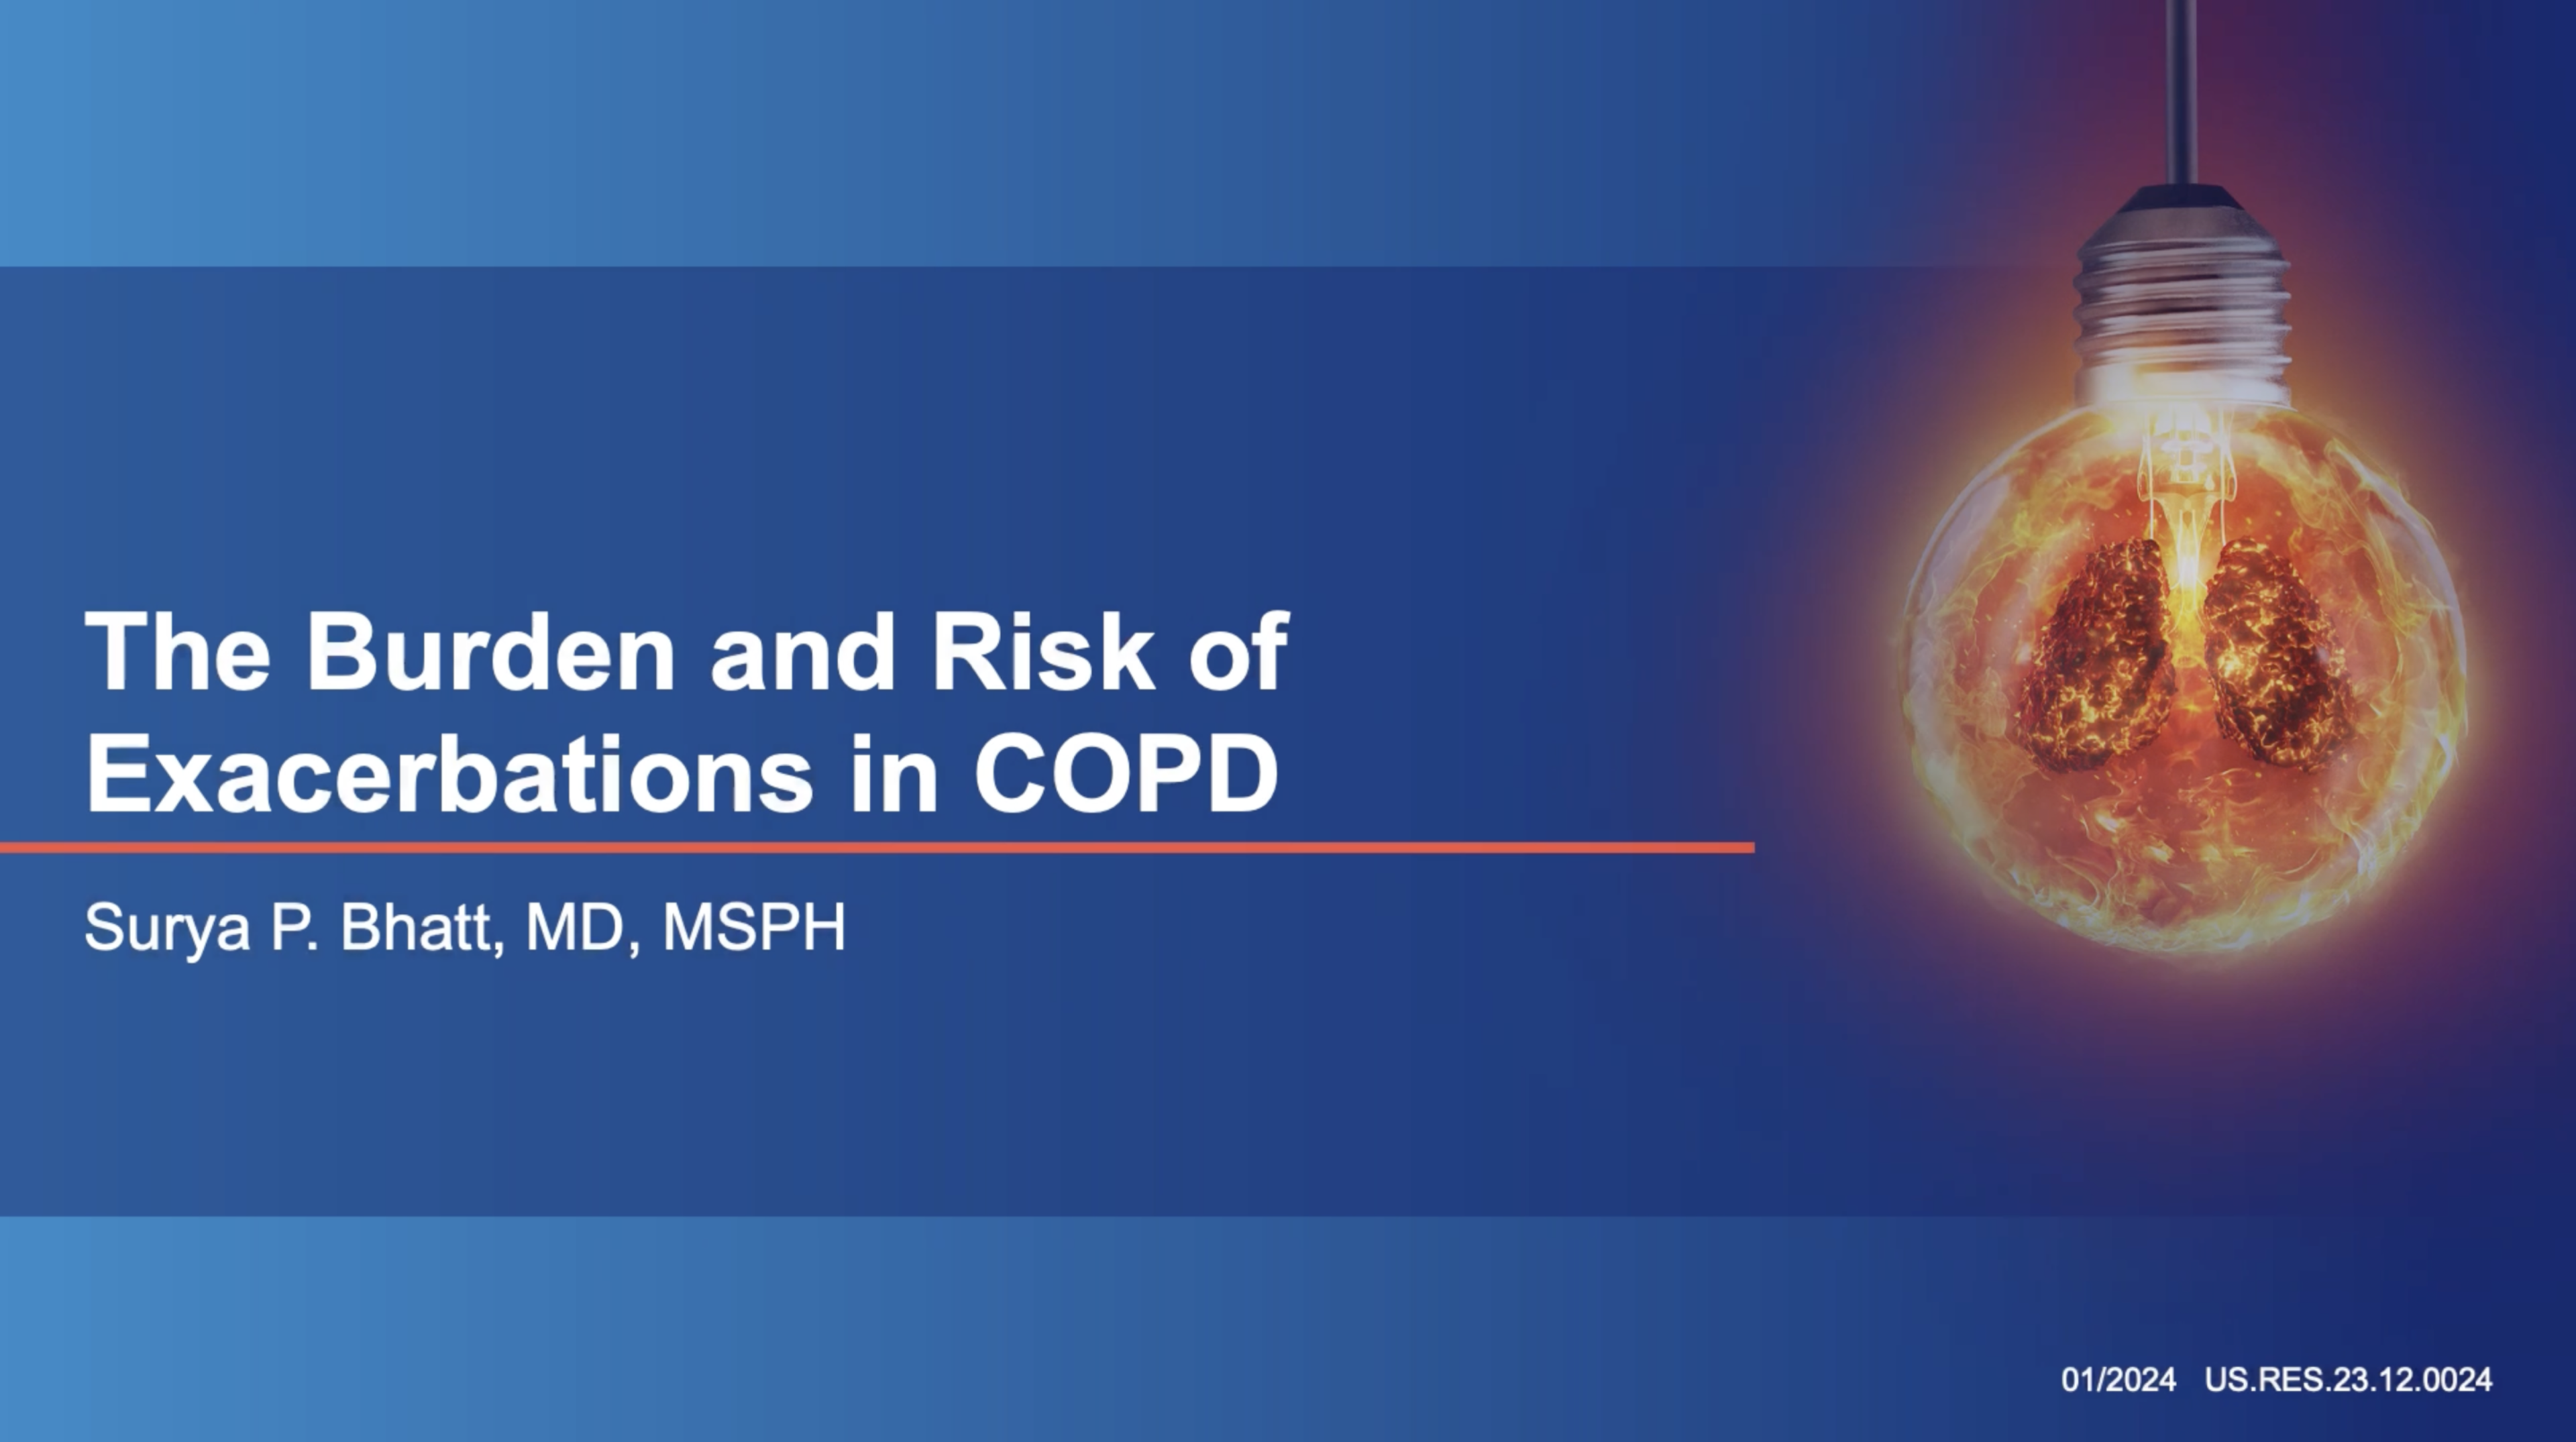 The burden and risk of exacerbations in COPD